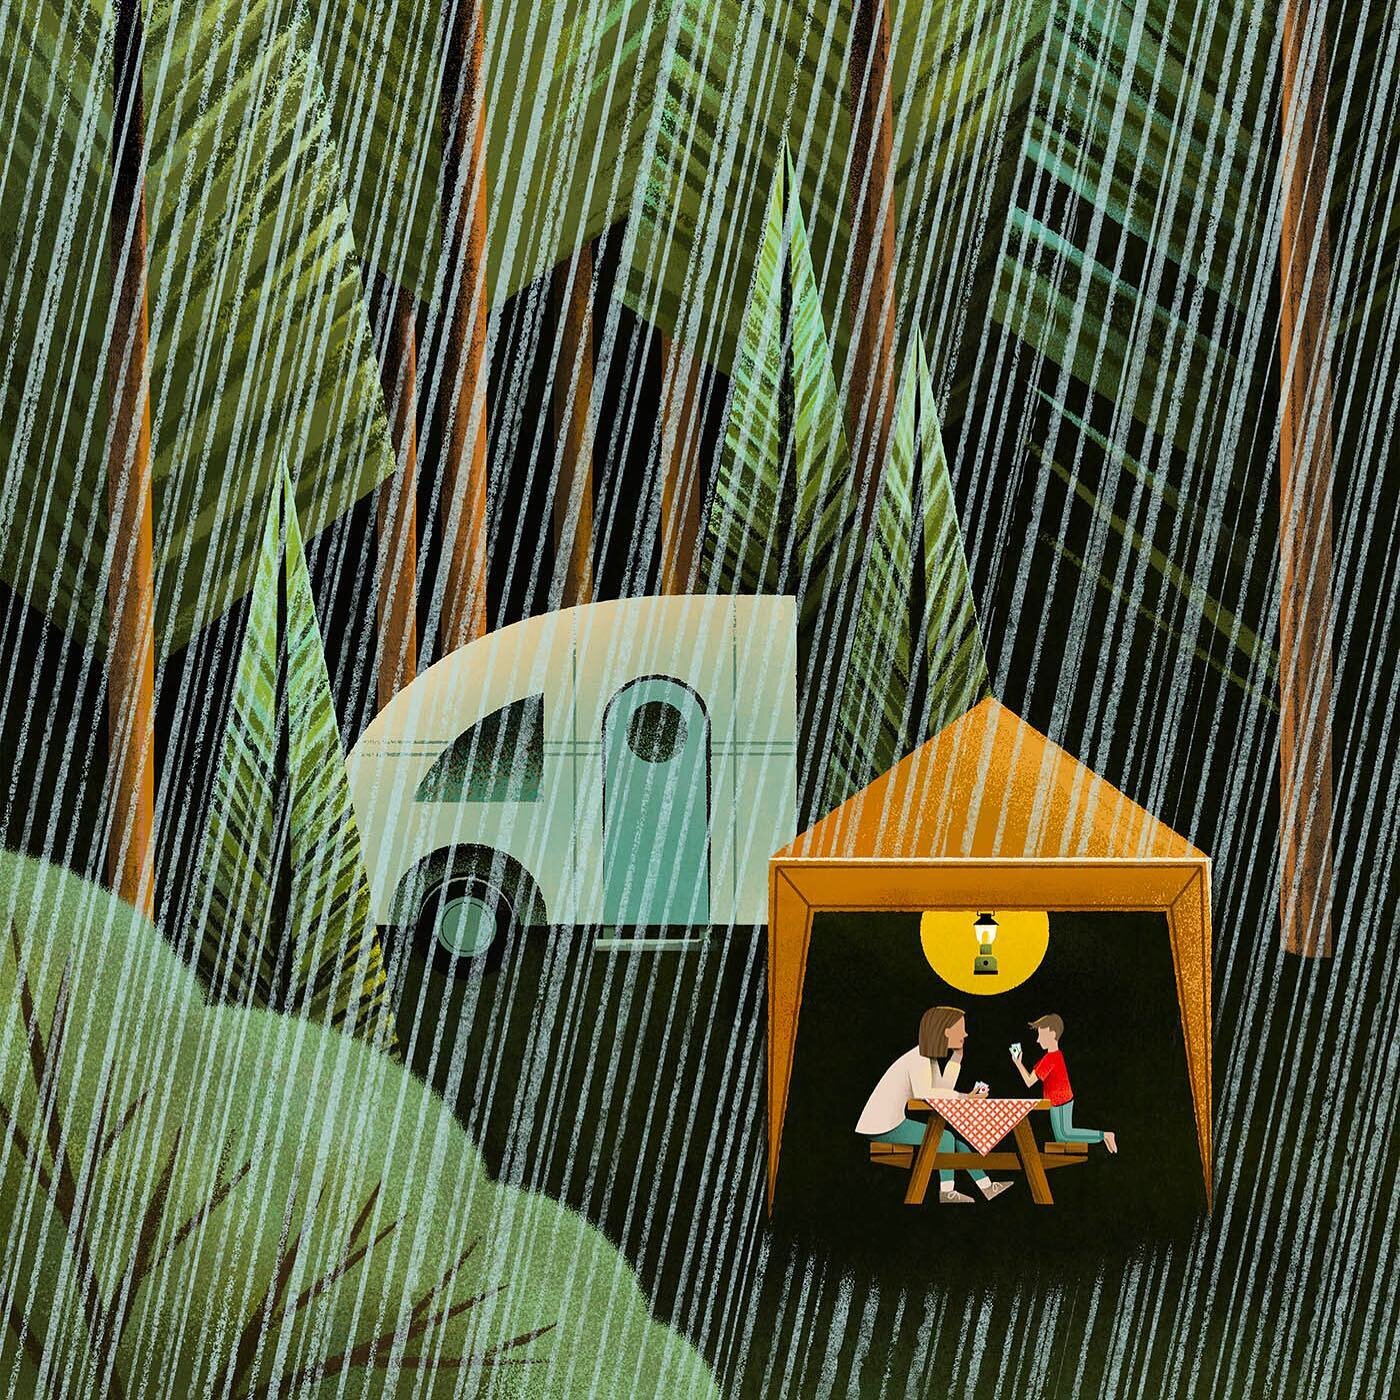 Sweet little moments 🌧️. Inspired by times with my mom and my son Bryce. Grandparents have a way of just making everything special ❤️ @borderleap #borderleap #illustrated #illustration #camping #rain #rainyday #illustrationartists #illustragram #app